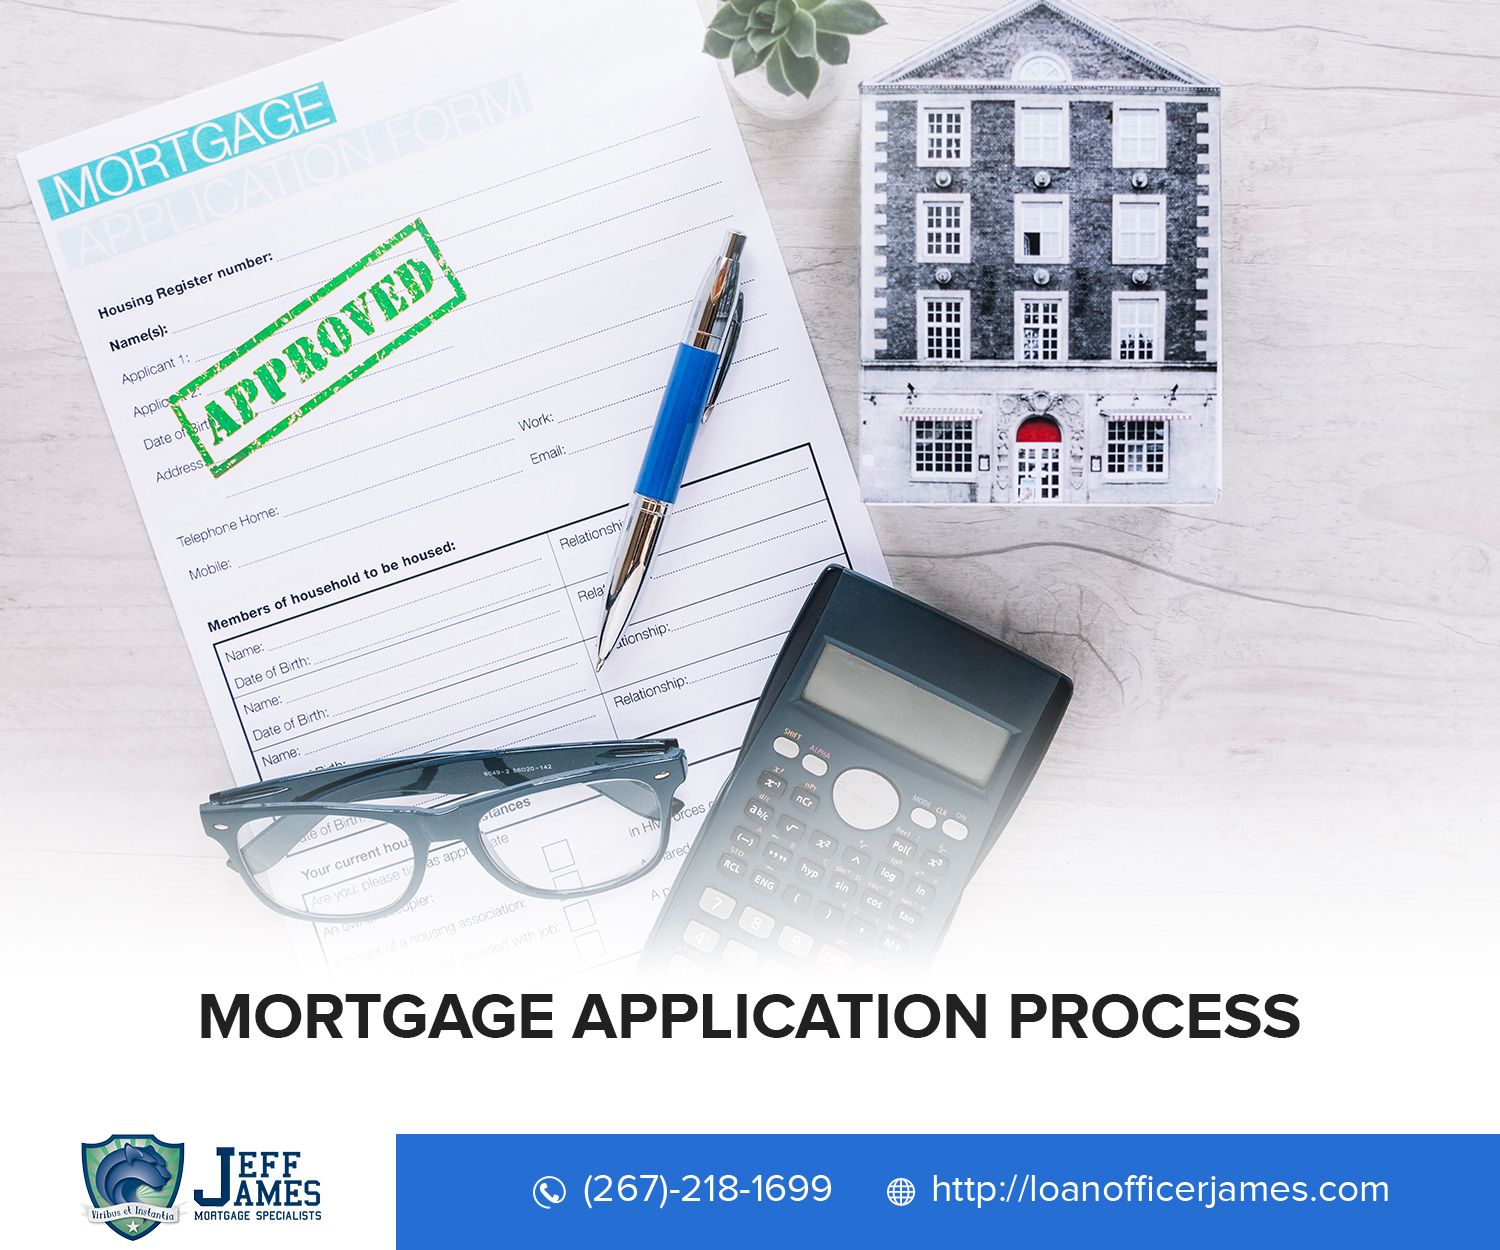 How long does the mortgage application process take?